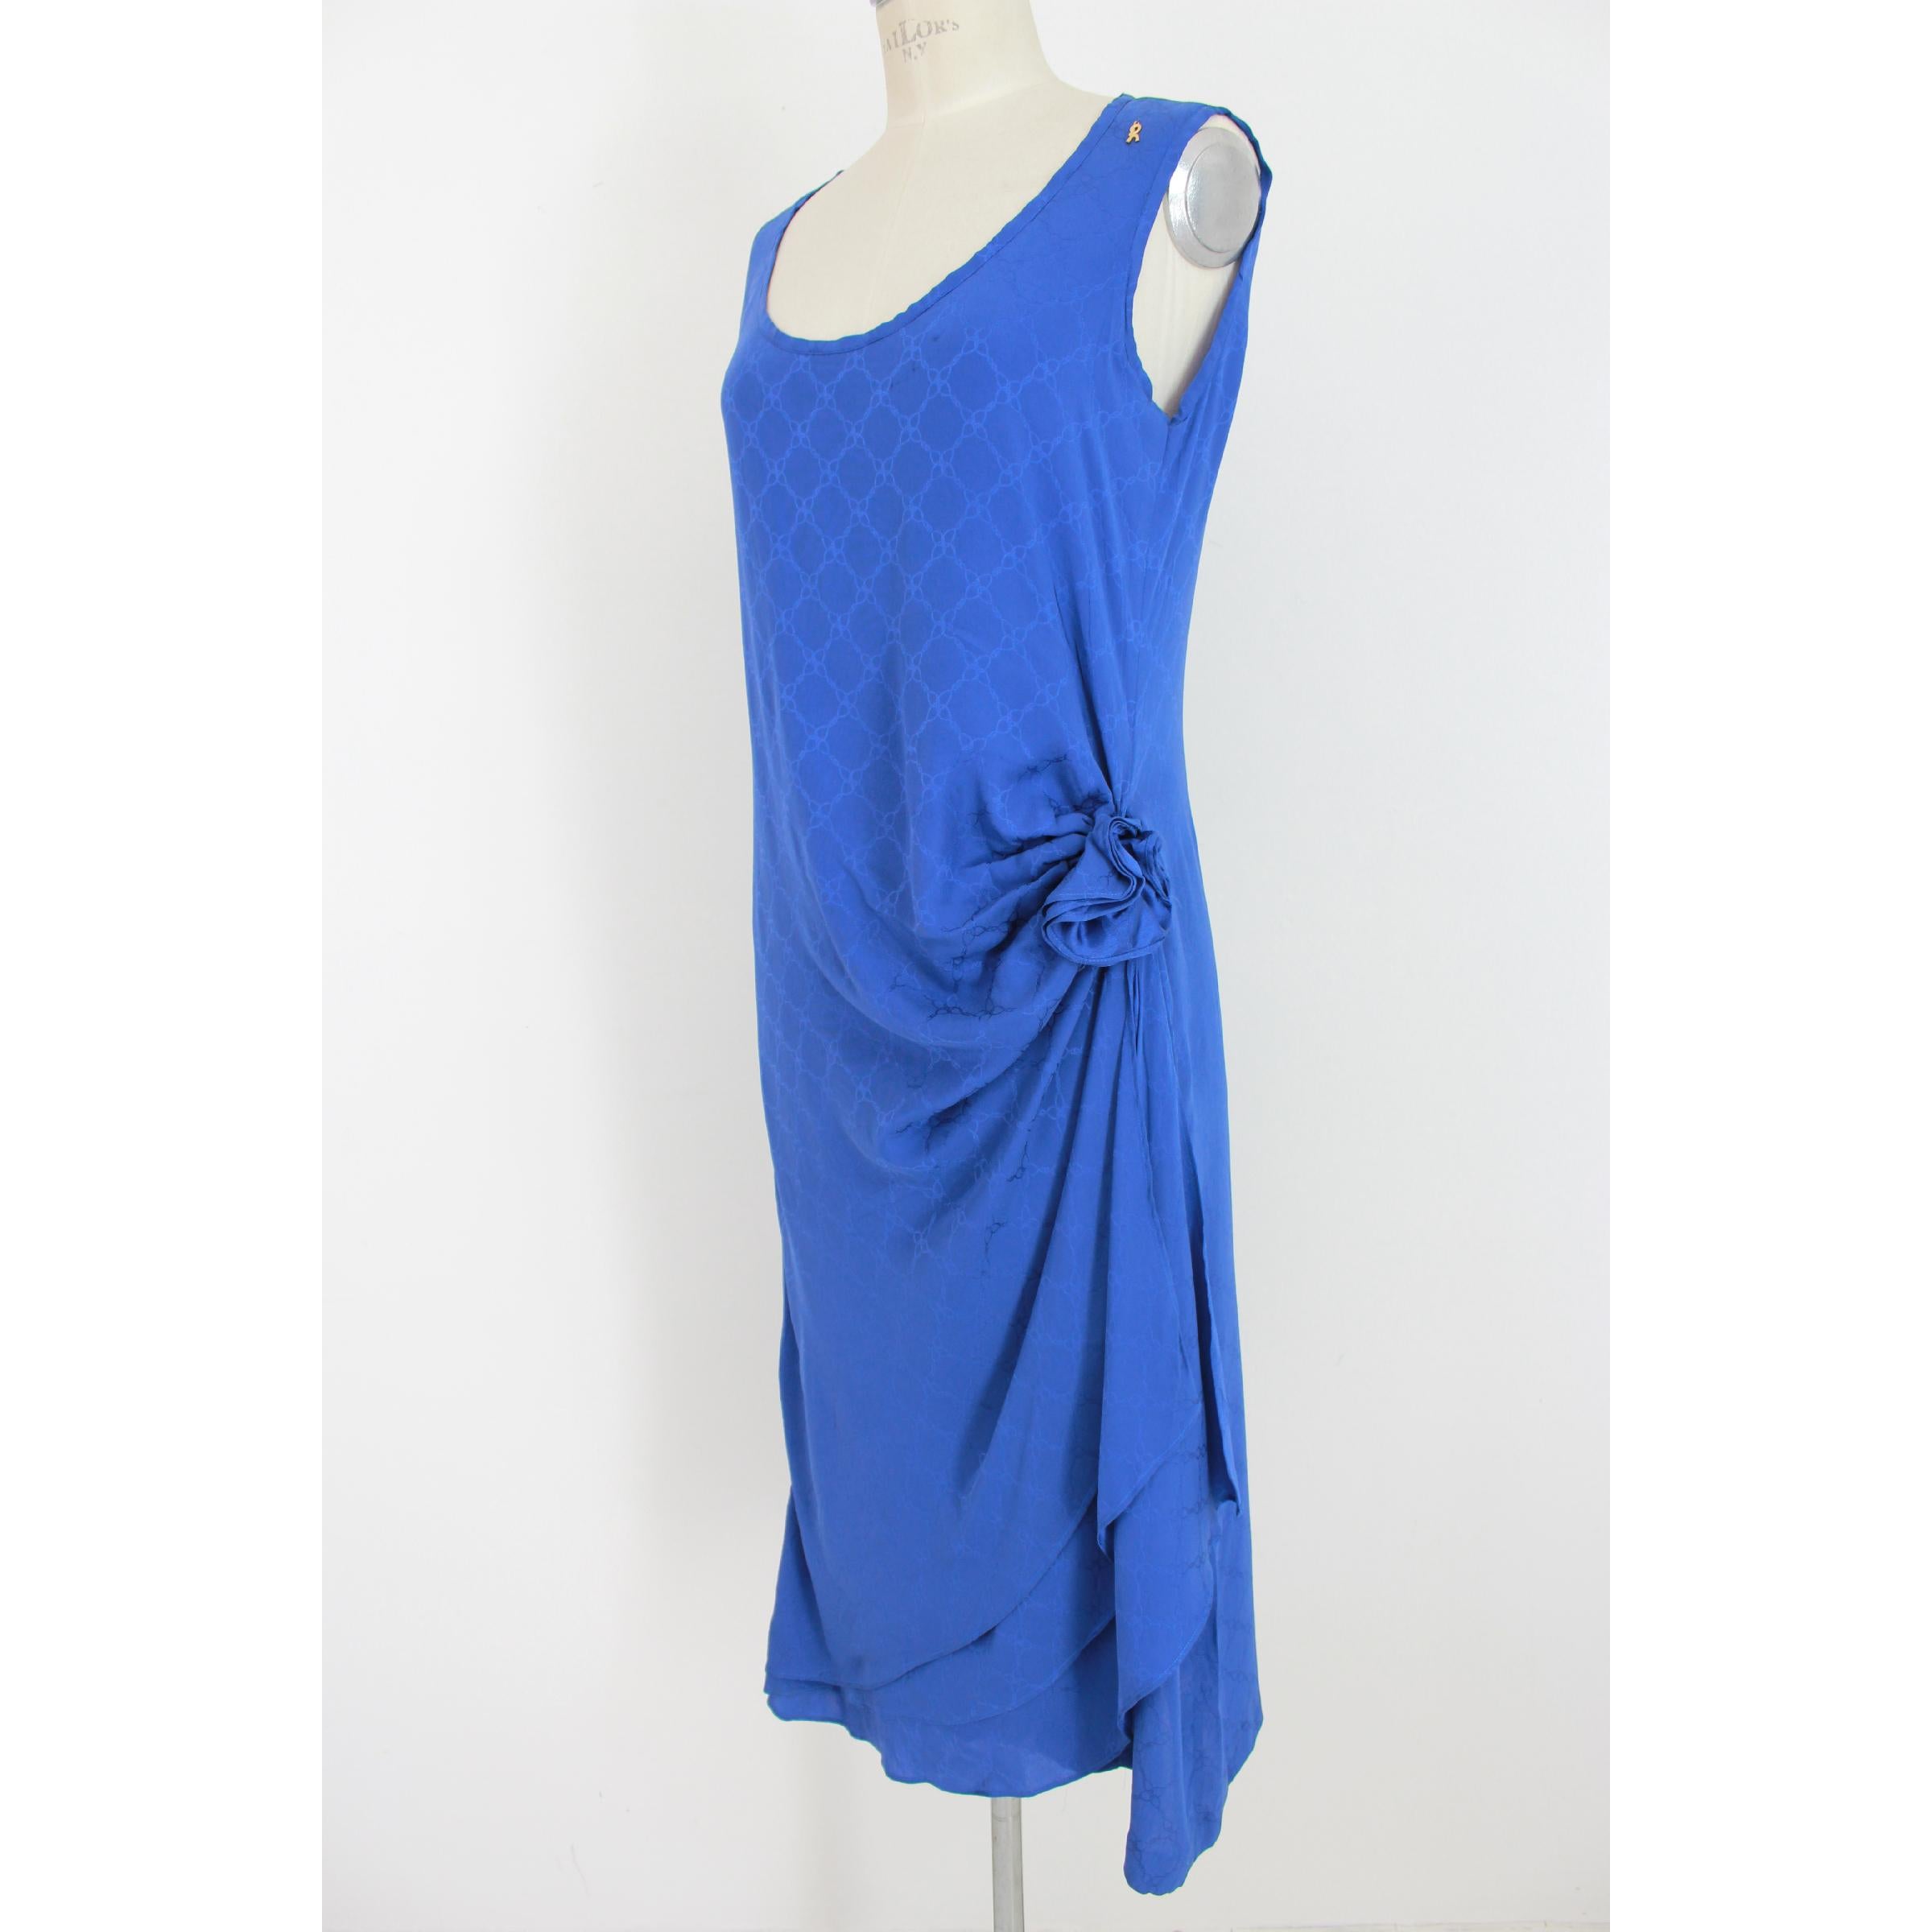 Roberta di Camerino vintage women's dress. Blue color, 100% silk. Long sleeveless dress, wallet skirt with flower on the side. Tone-on-tone geometric design. 80s. Made in Italy. Excellent vintage condition.

Size: 46 It 12 Us 14 Uk 

Shoulder: 46 cm